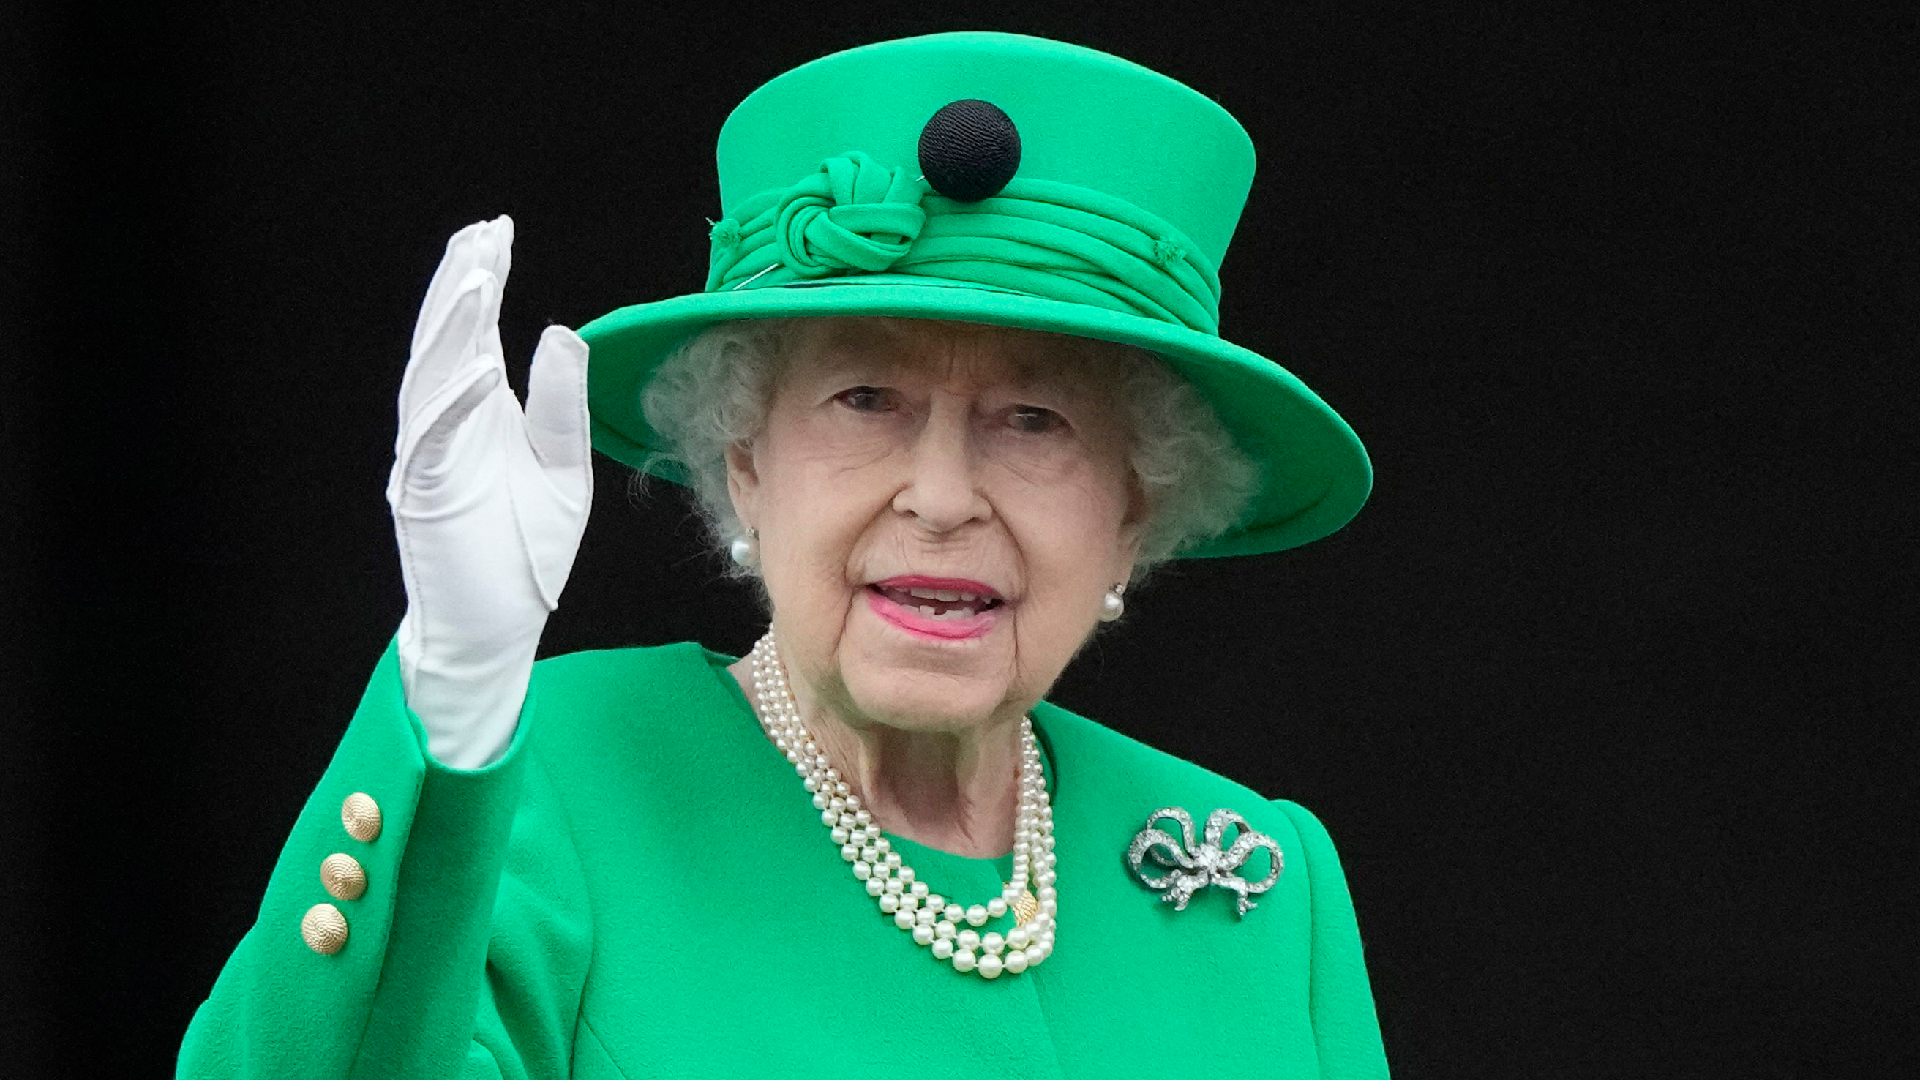 The Queen becomes world's second-longest serving monarch of all